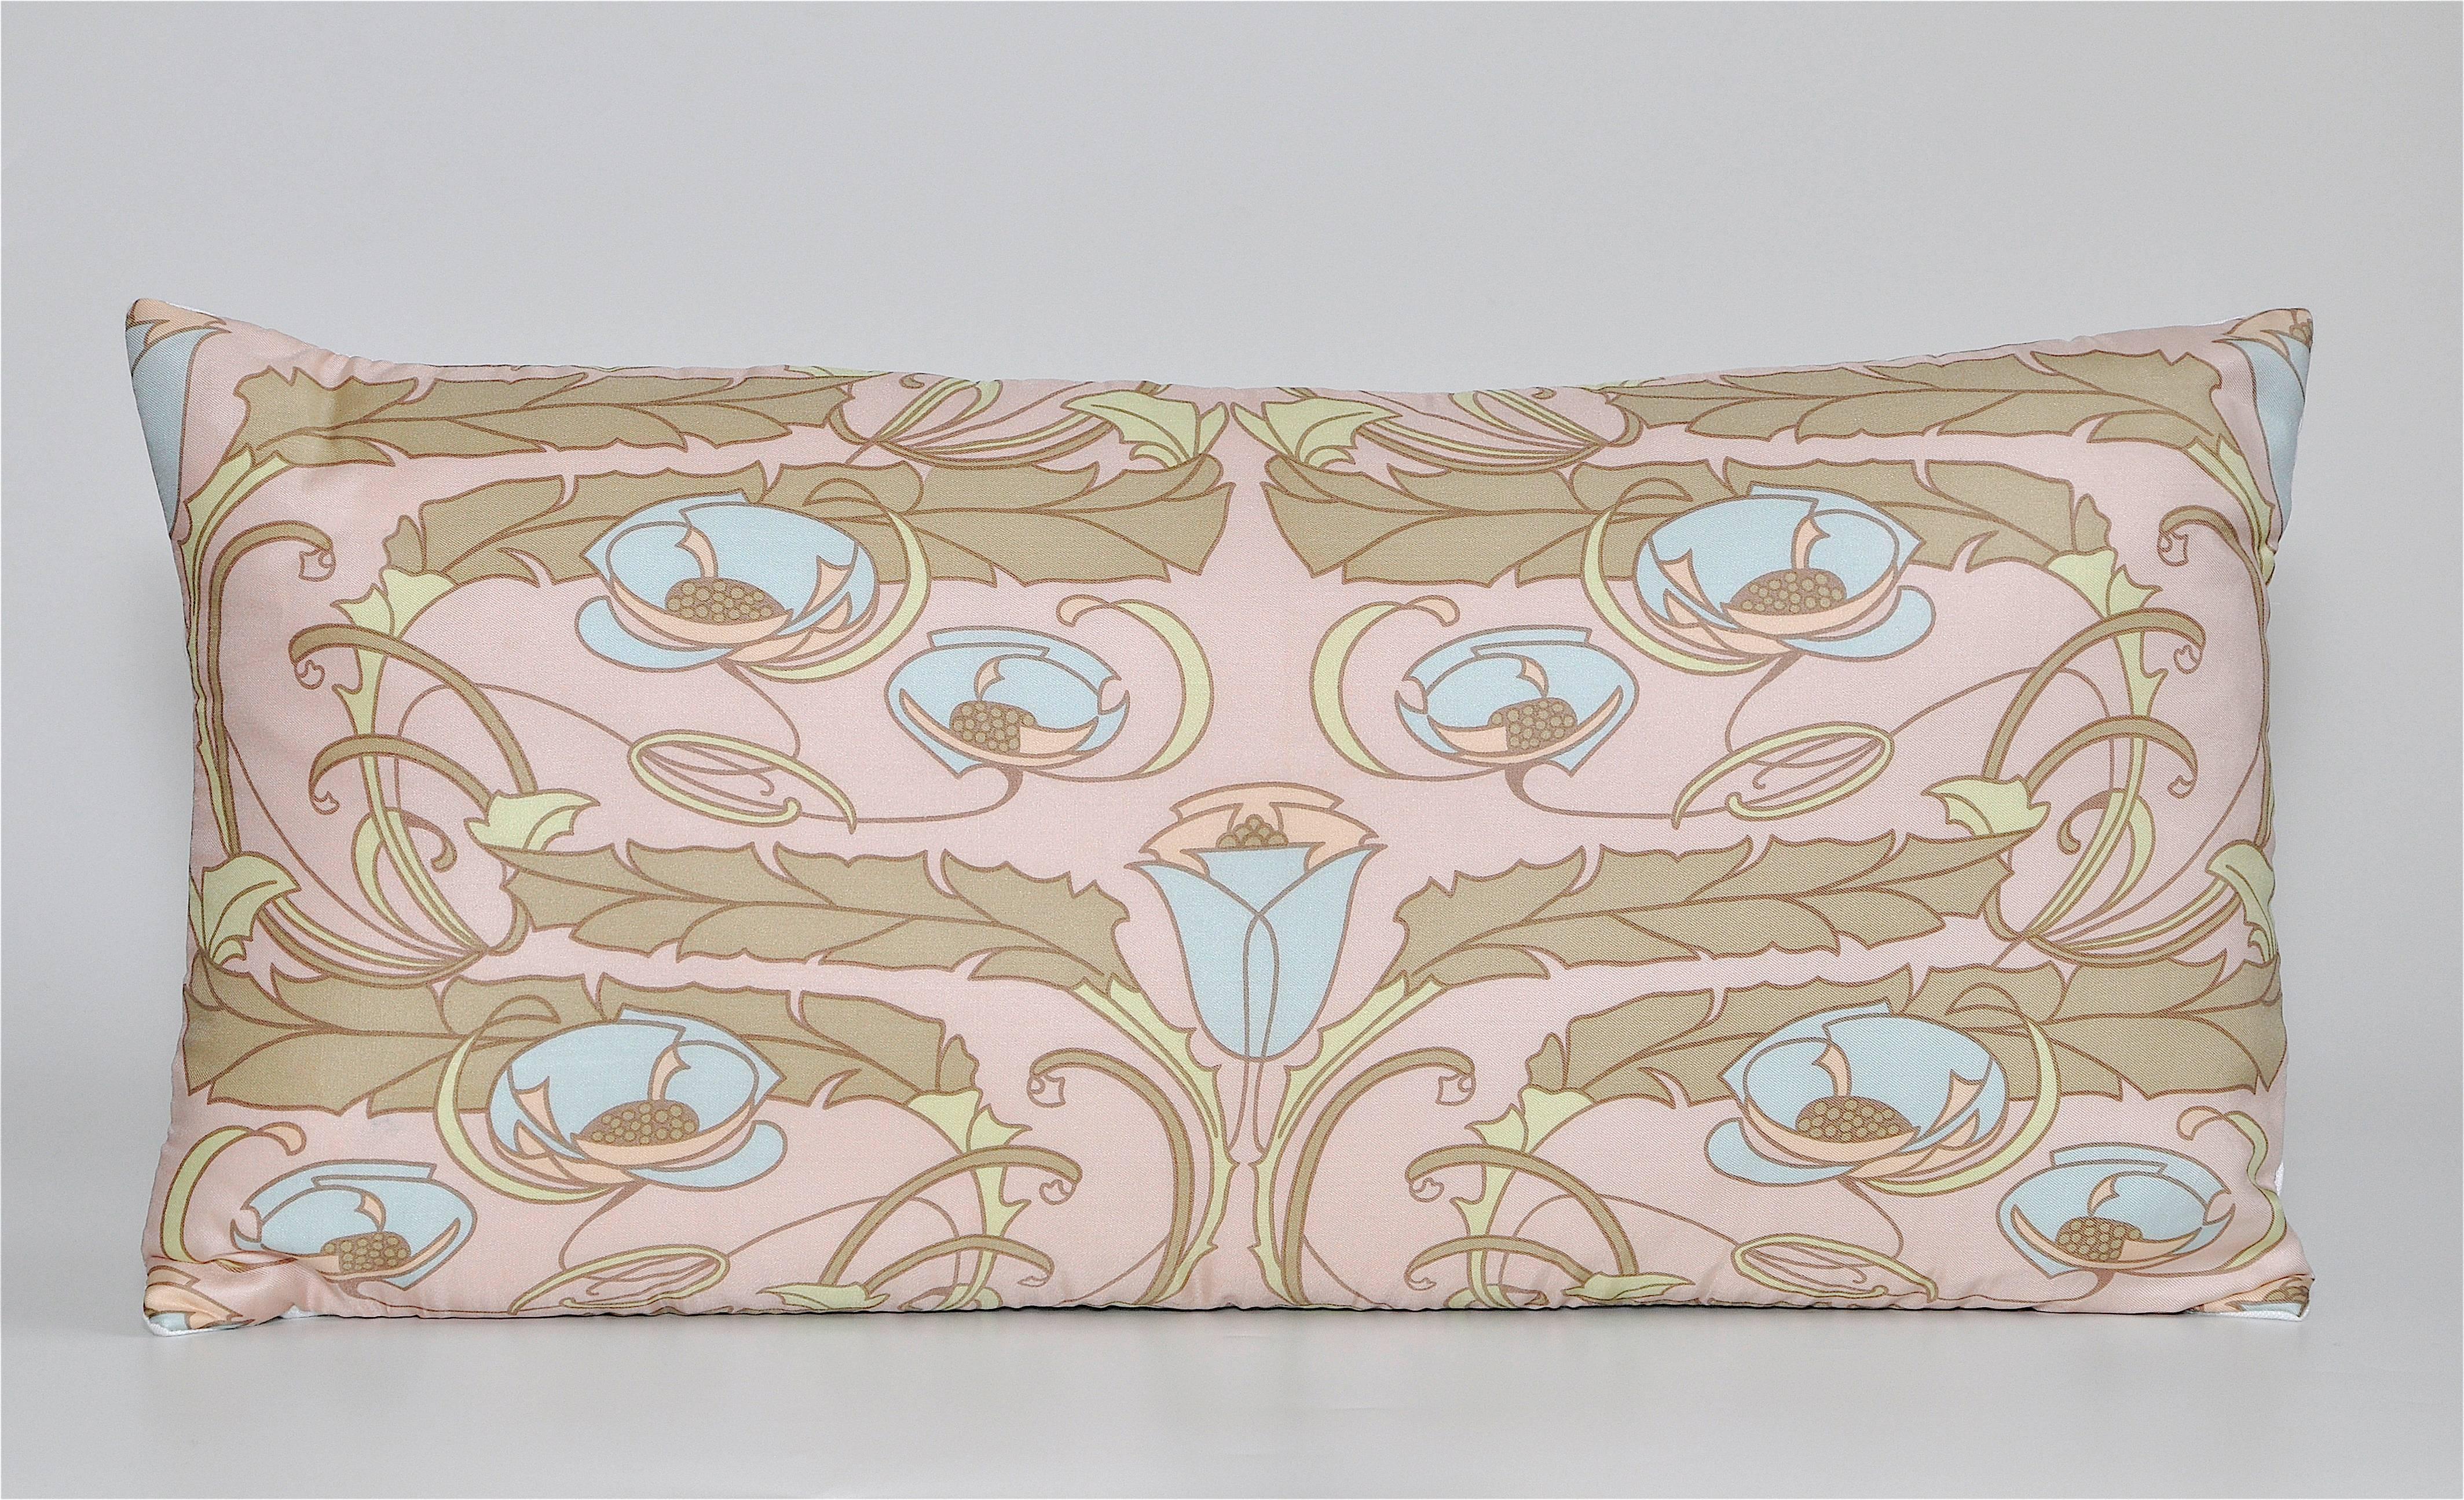 custom-made one-of-a-kind pair of luxury cushions (pillows) created from an exquisite vintage silk Liberty of London fashion scarf in a pastel coloured organic design. Sensuous leaves and delicate blue flower heads swirl and intertwine with each